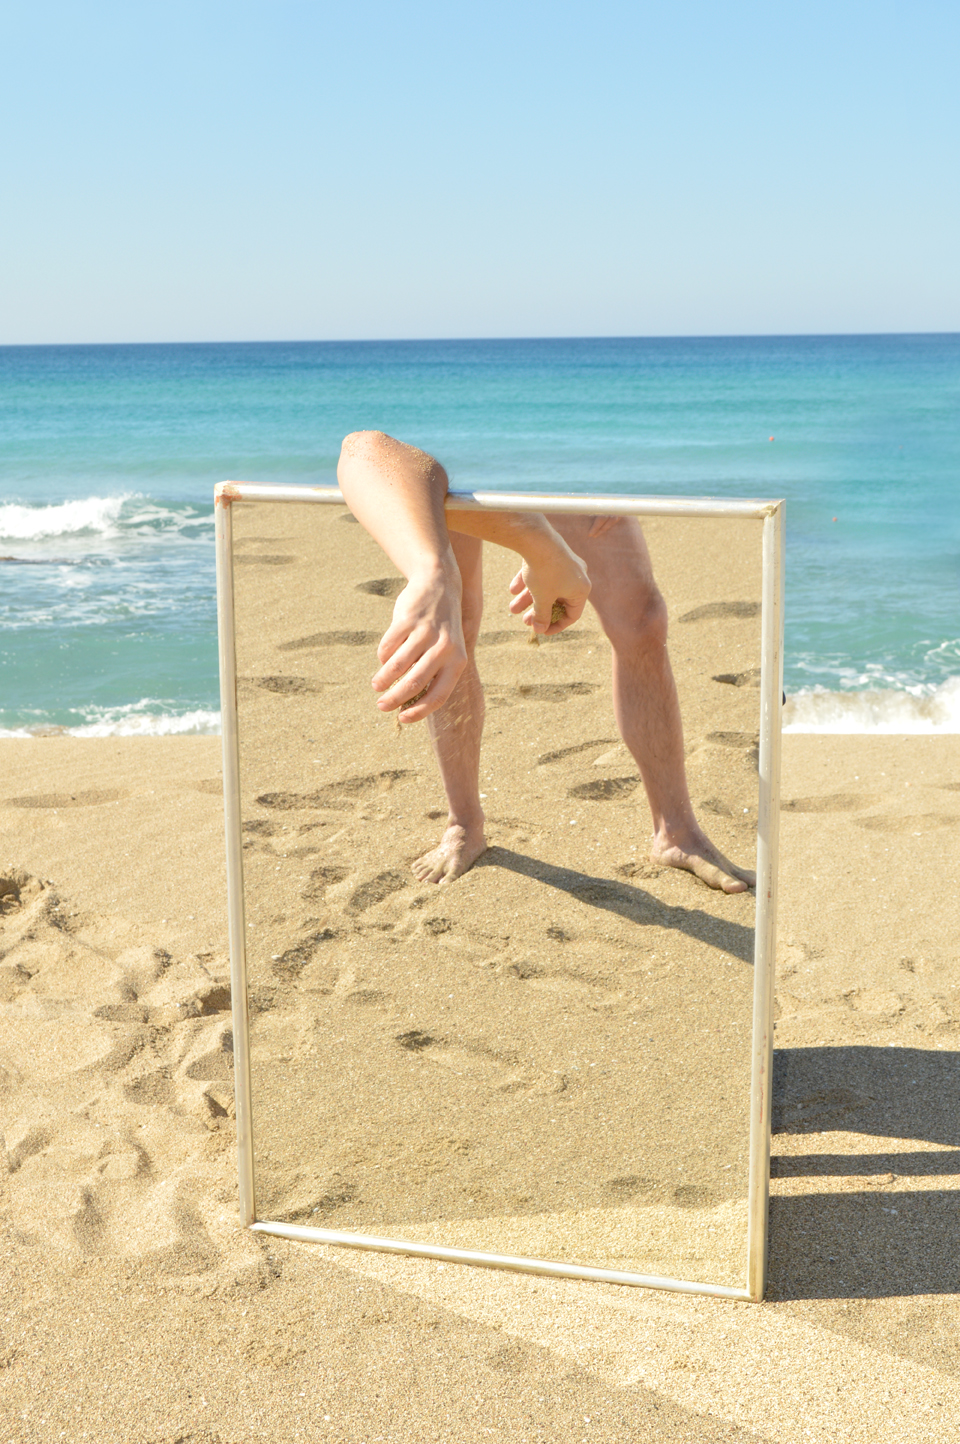 Surreal photography by Kostis Fokas 